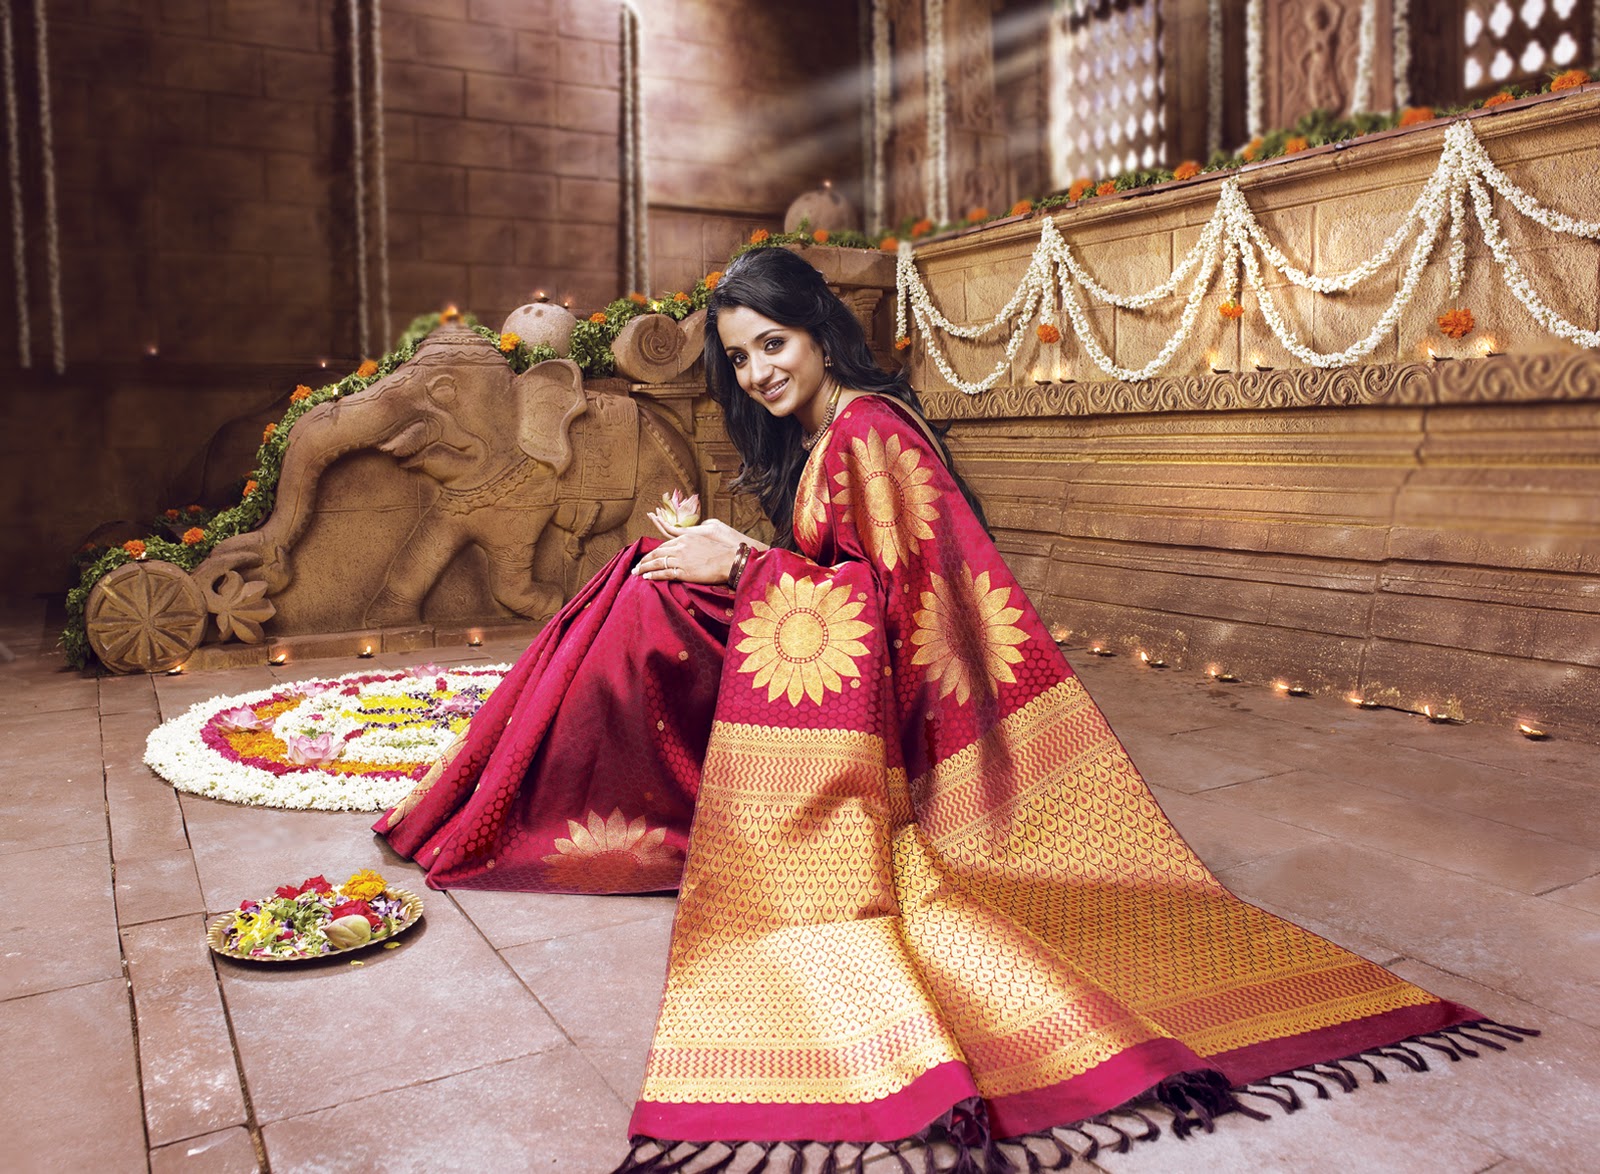 35 Diwali Photography Ideas | How to Take Better Diwali Festival Pictures